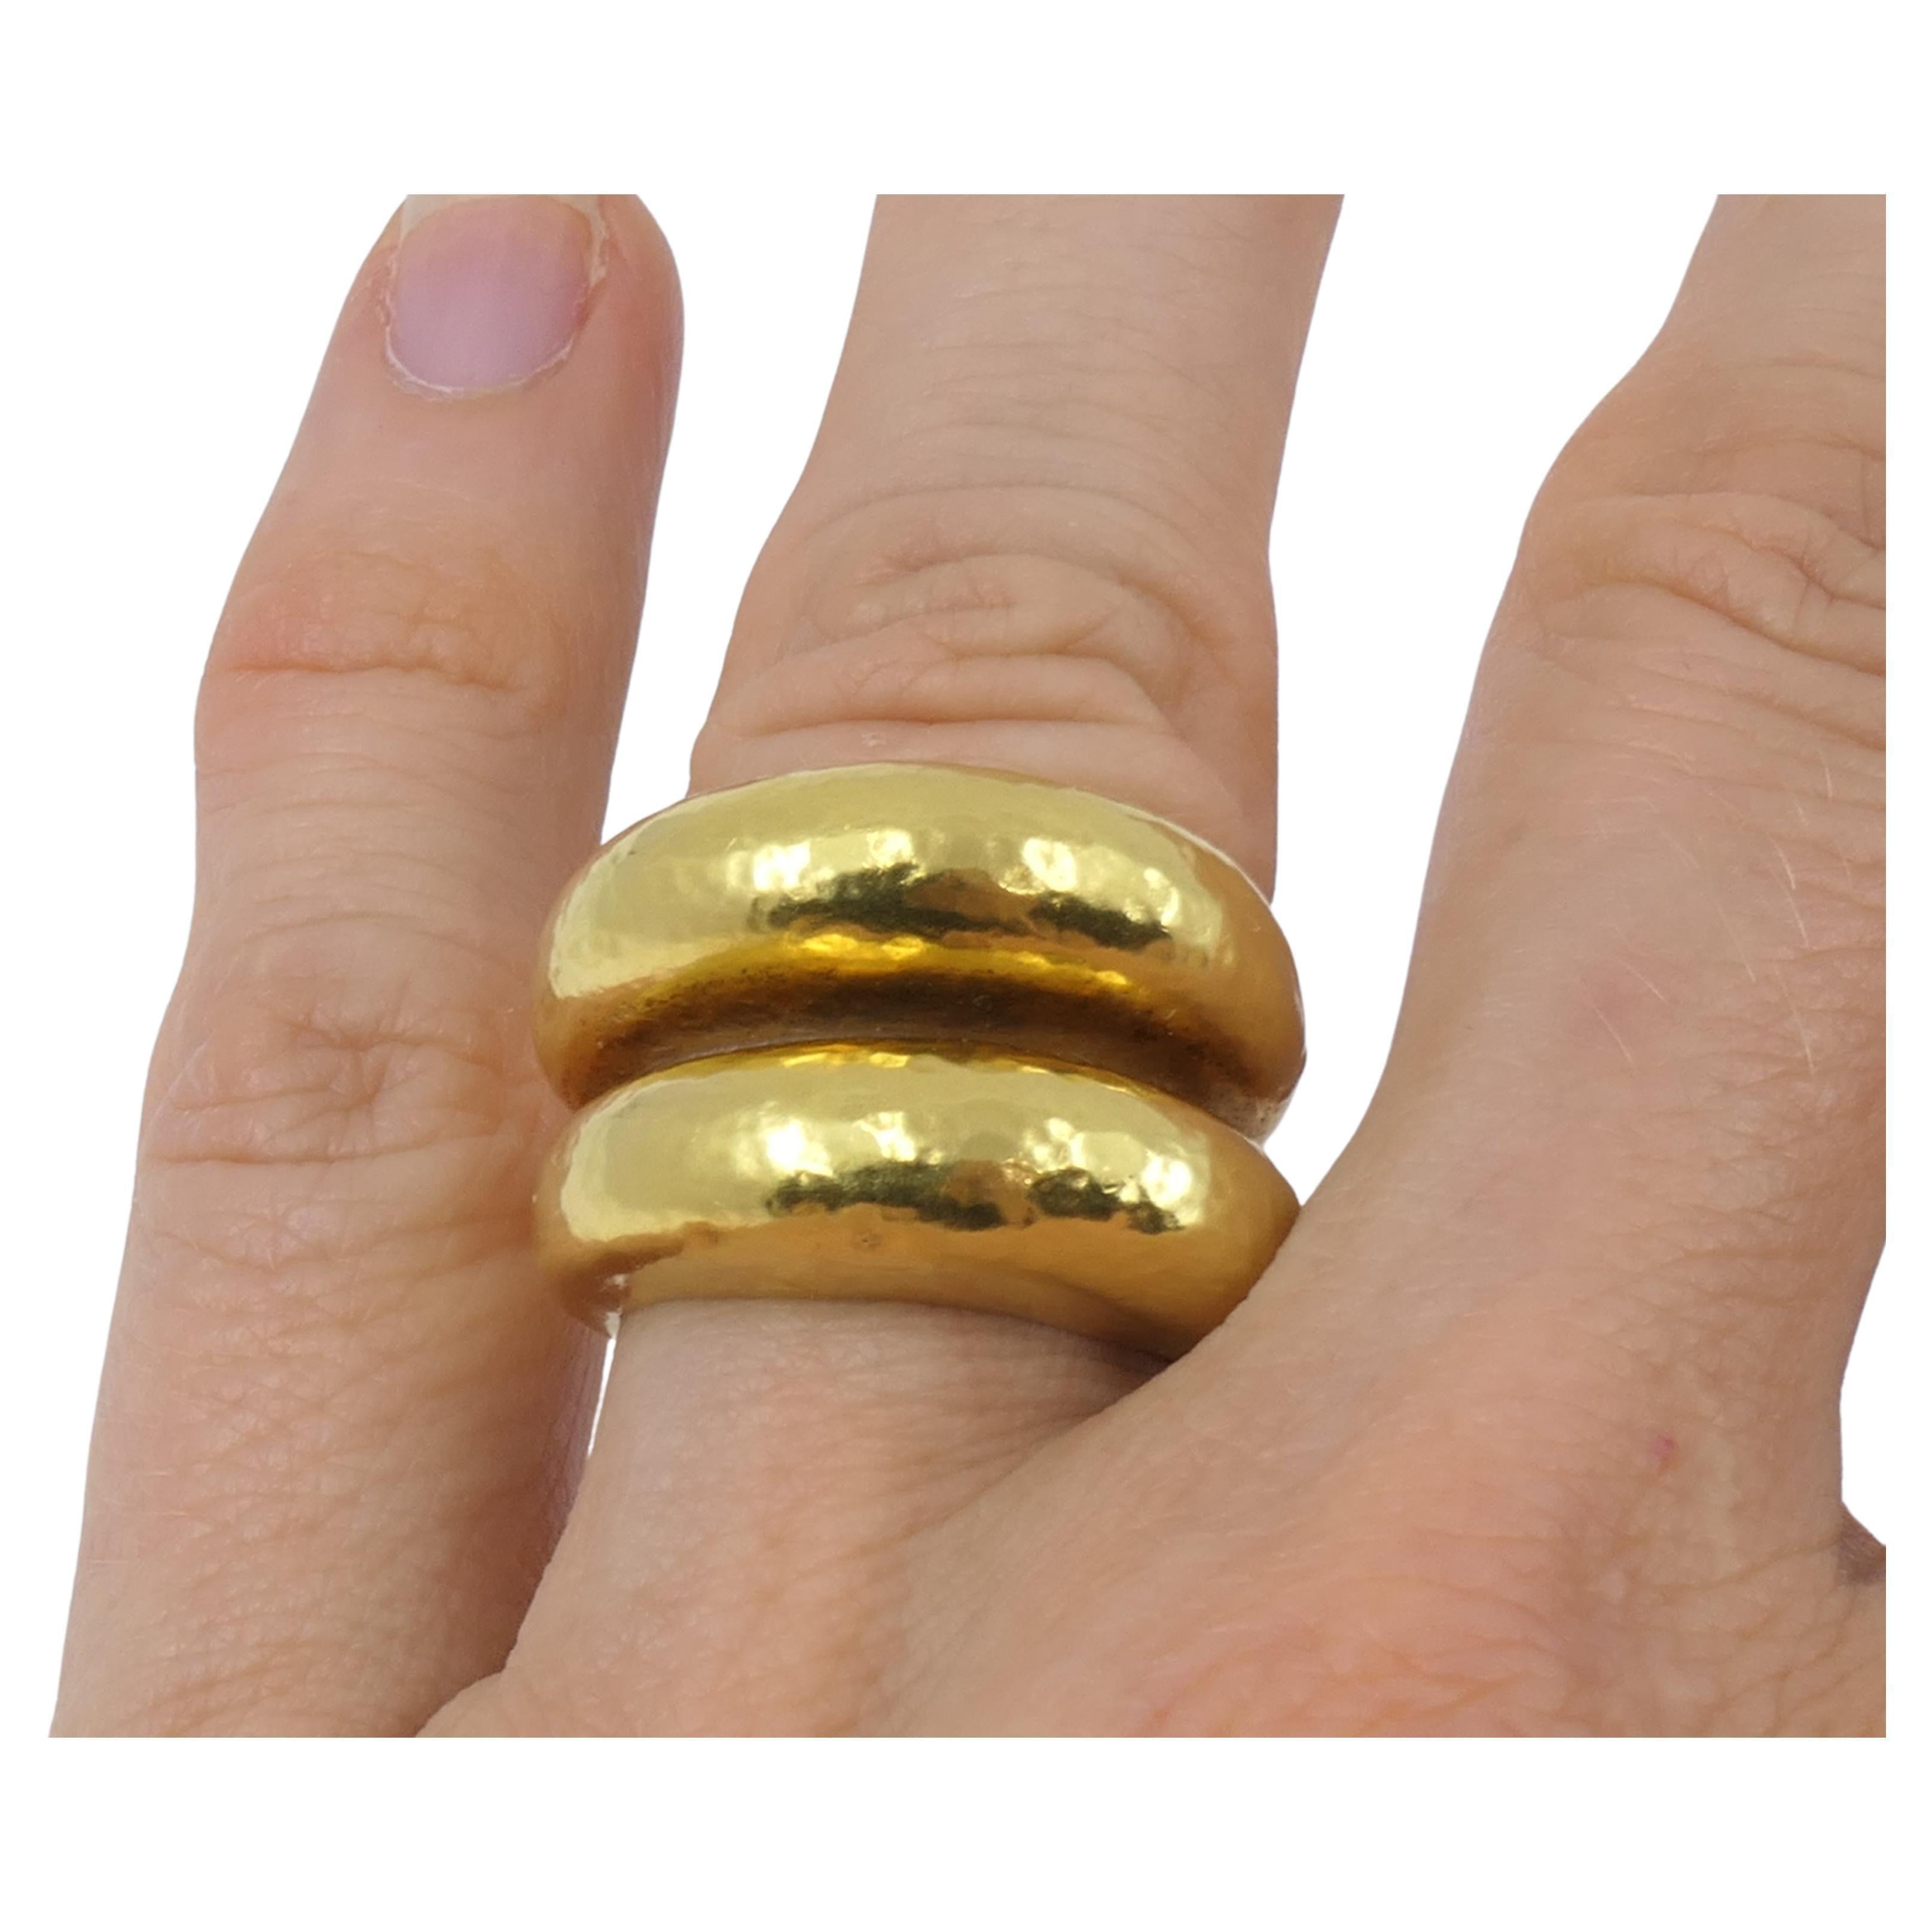 A shiny band ring by Zolotas, made of 22k gold. The ring is crafted as a double band, with an open shank. The gold is slightly hammered to add a unique texture, a signature feature for Zolotas' jewelry. Despite its minimal design, this ring is just